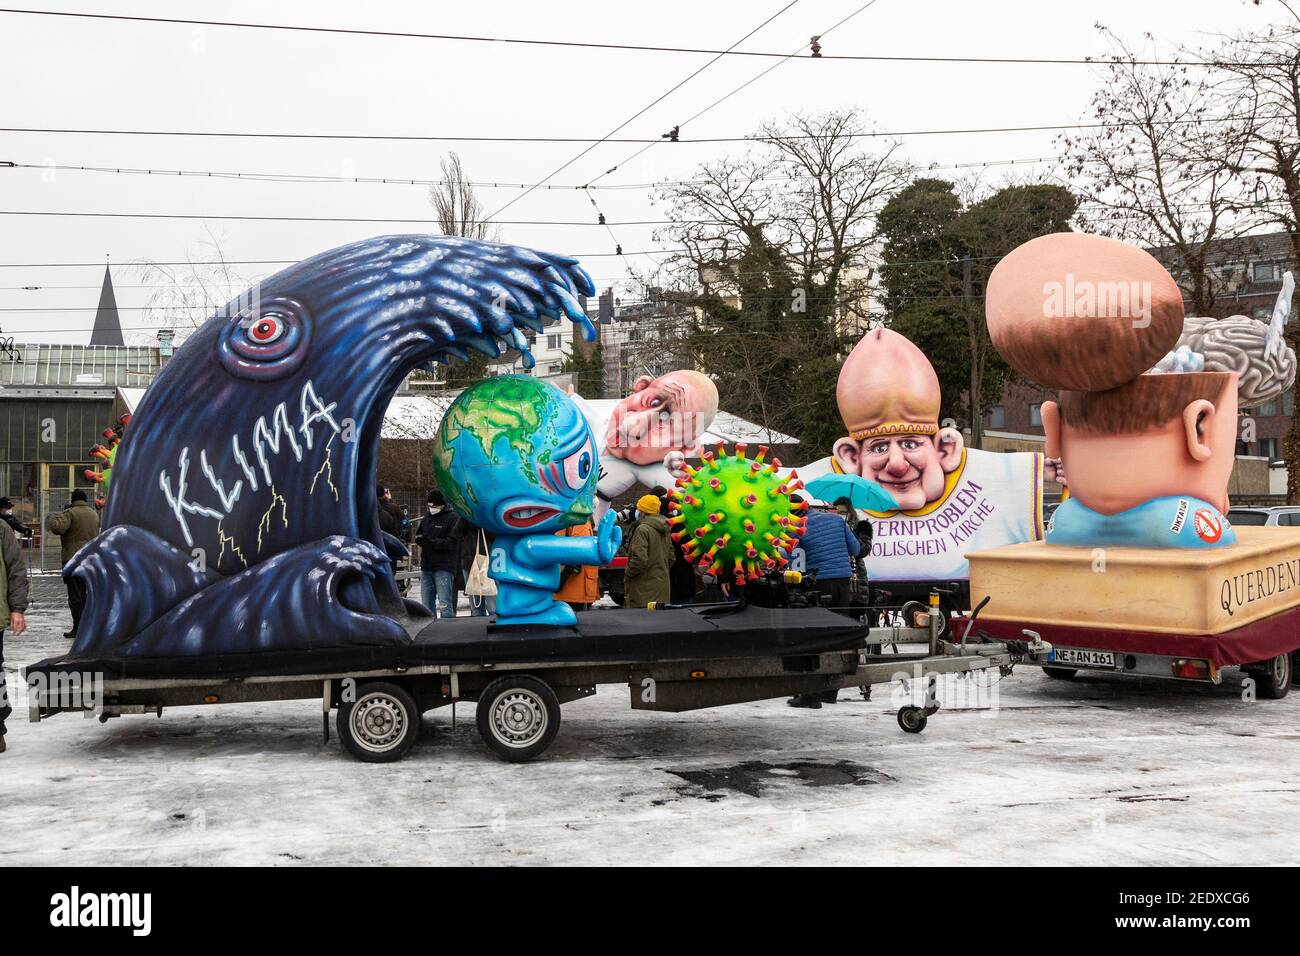 Dusseldorf, Germany. 15 February 2021. Carnival floats created by German artist Jacques Tilly were presented and later exhibited throughout Dusseldorf as the main carnival parade was cancelled due to the coronavirus pandemic. Credit: Bettina Strenske/Alamy Live News Stock Photo